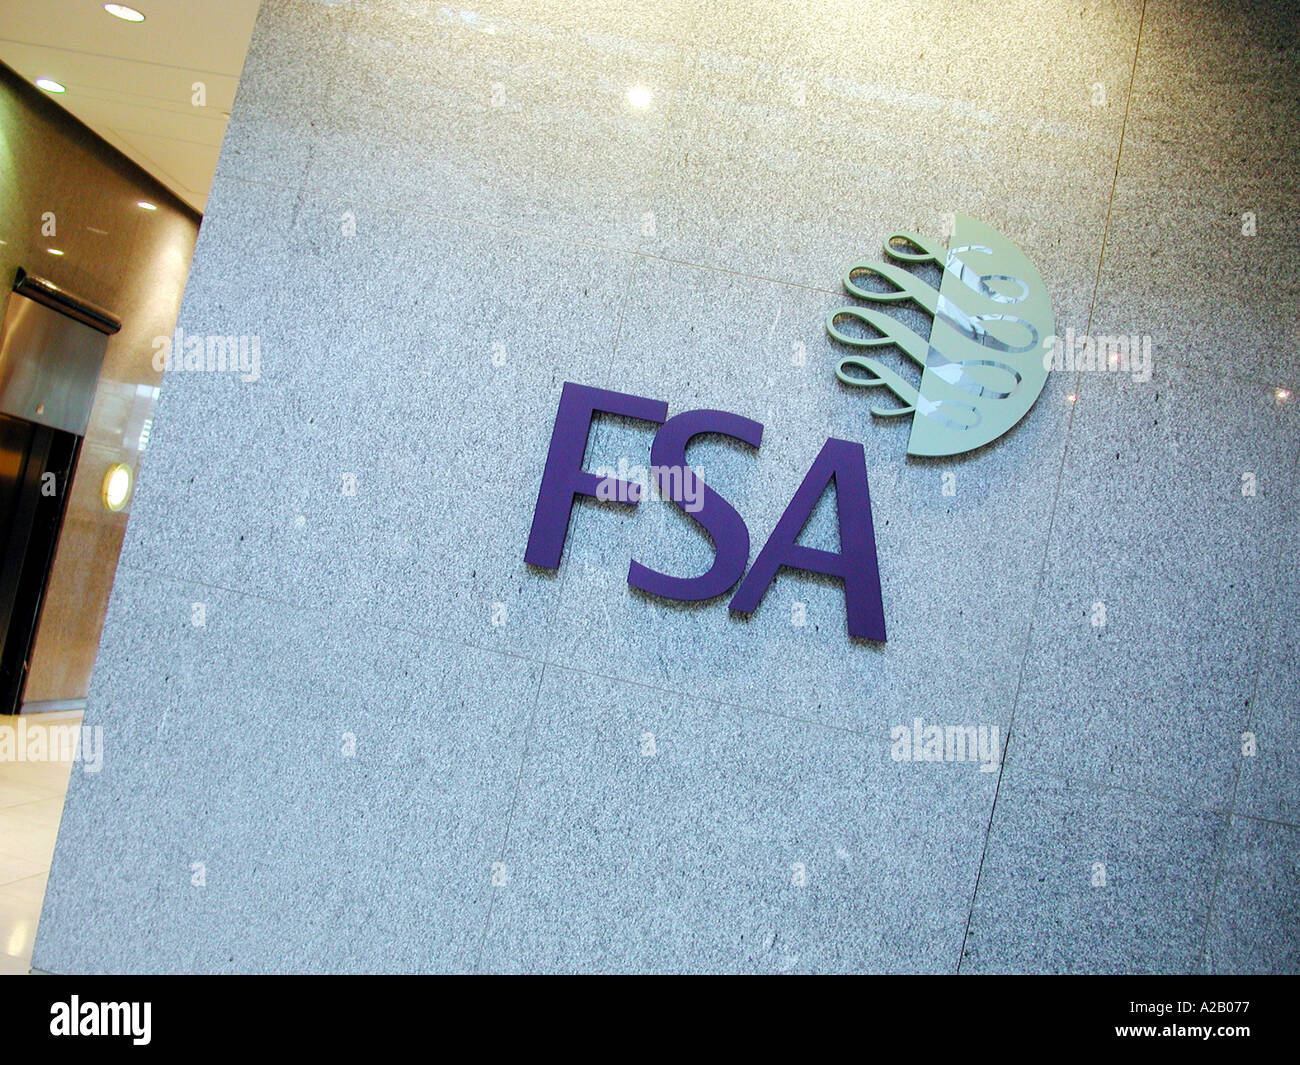 Inside the foyer of the FSA, Financial Services Authority Offices, Canary Wharf, Isle of Dogs, London E14, showing the FSA sign signage and logo. Stock Photo